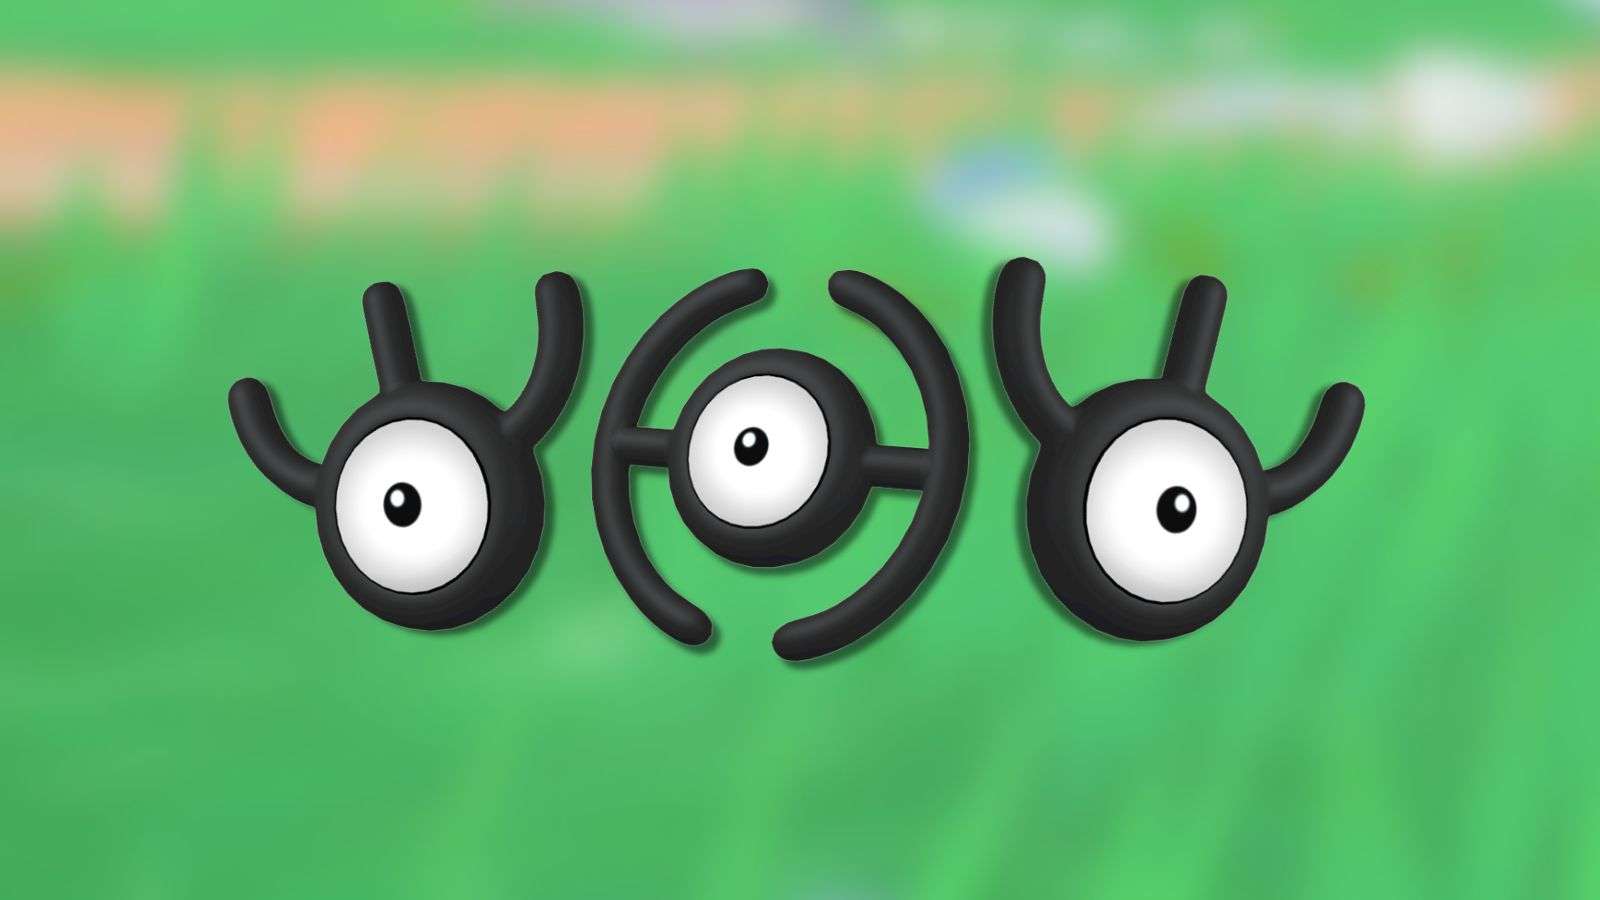 Unown Pokemon spelling 'wow' with anime background.